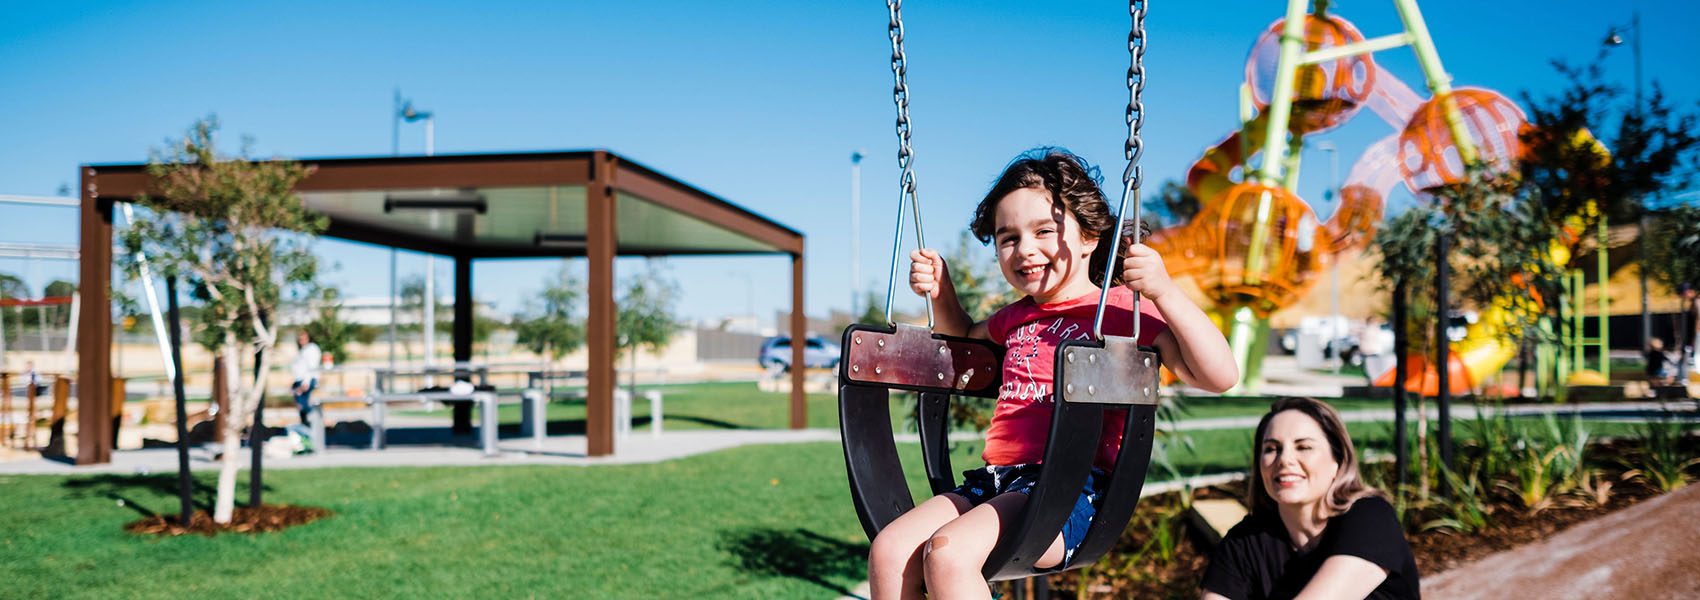 This image shows a child having fun on the swing at Brightwood Park in Baldivis. There is bright green grass and fun equipment to play with. Move Homes has house and land packages in Baldivis near Brightwood Park.